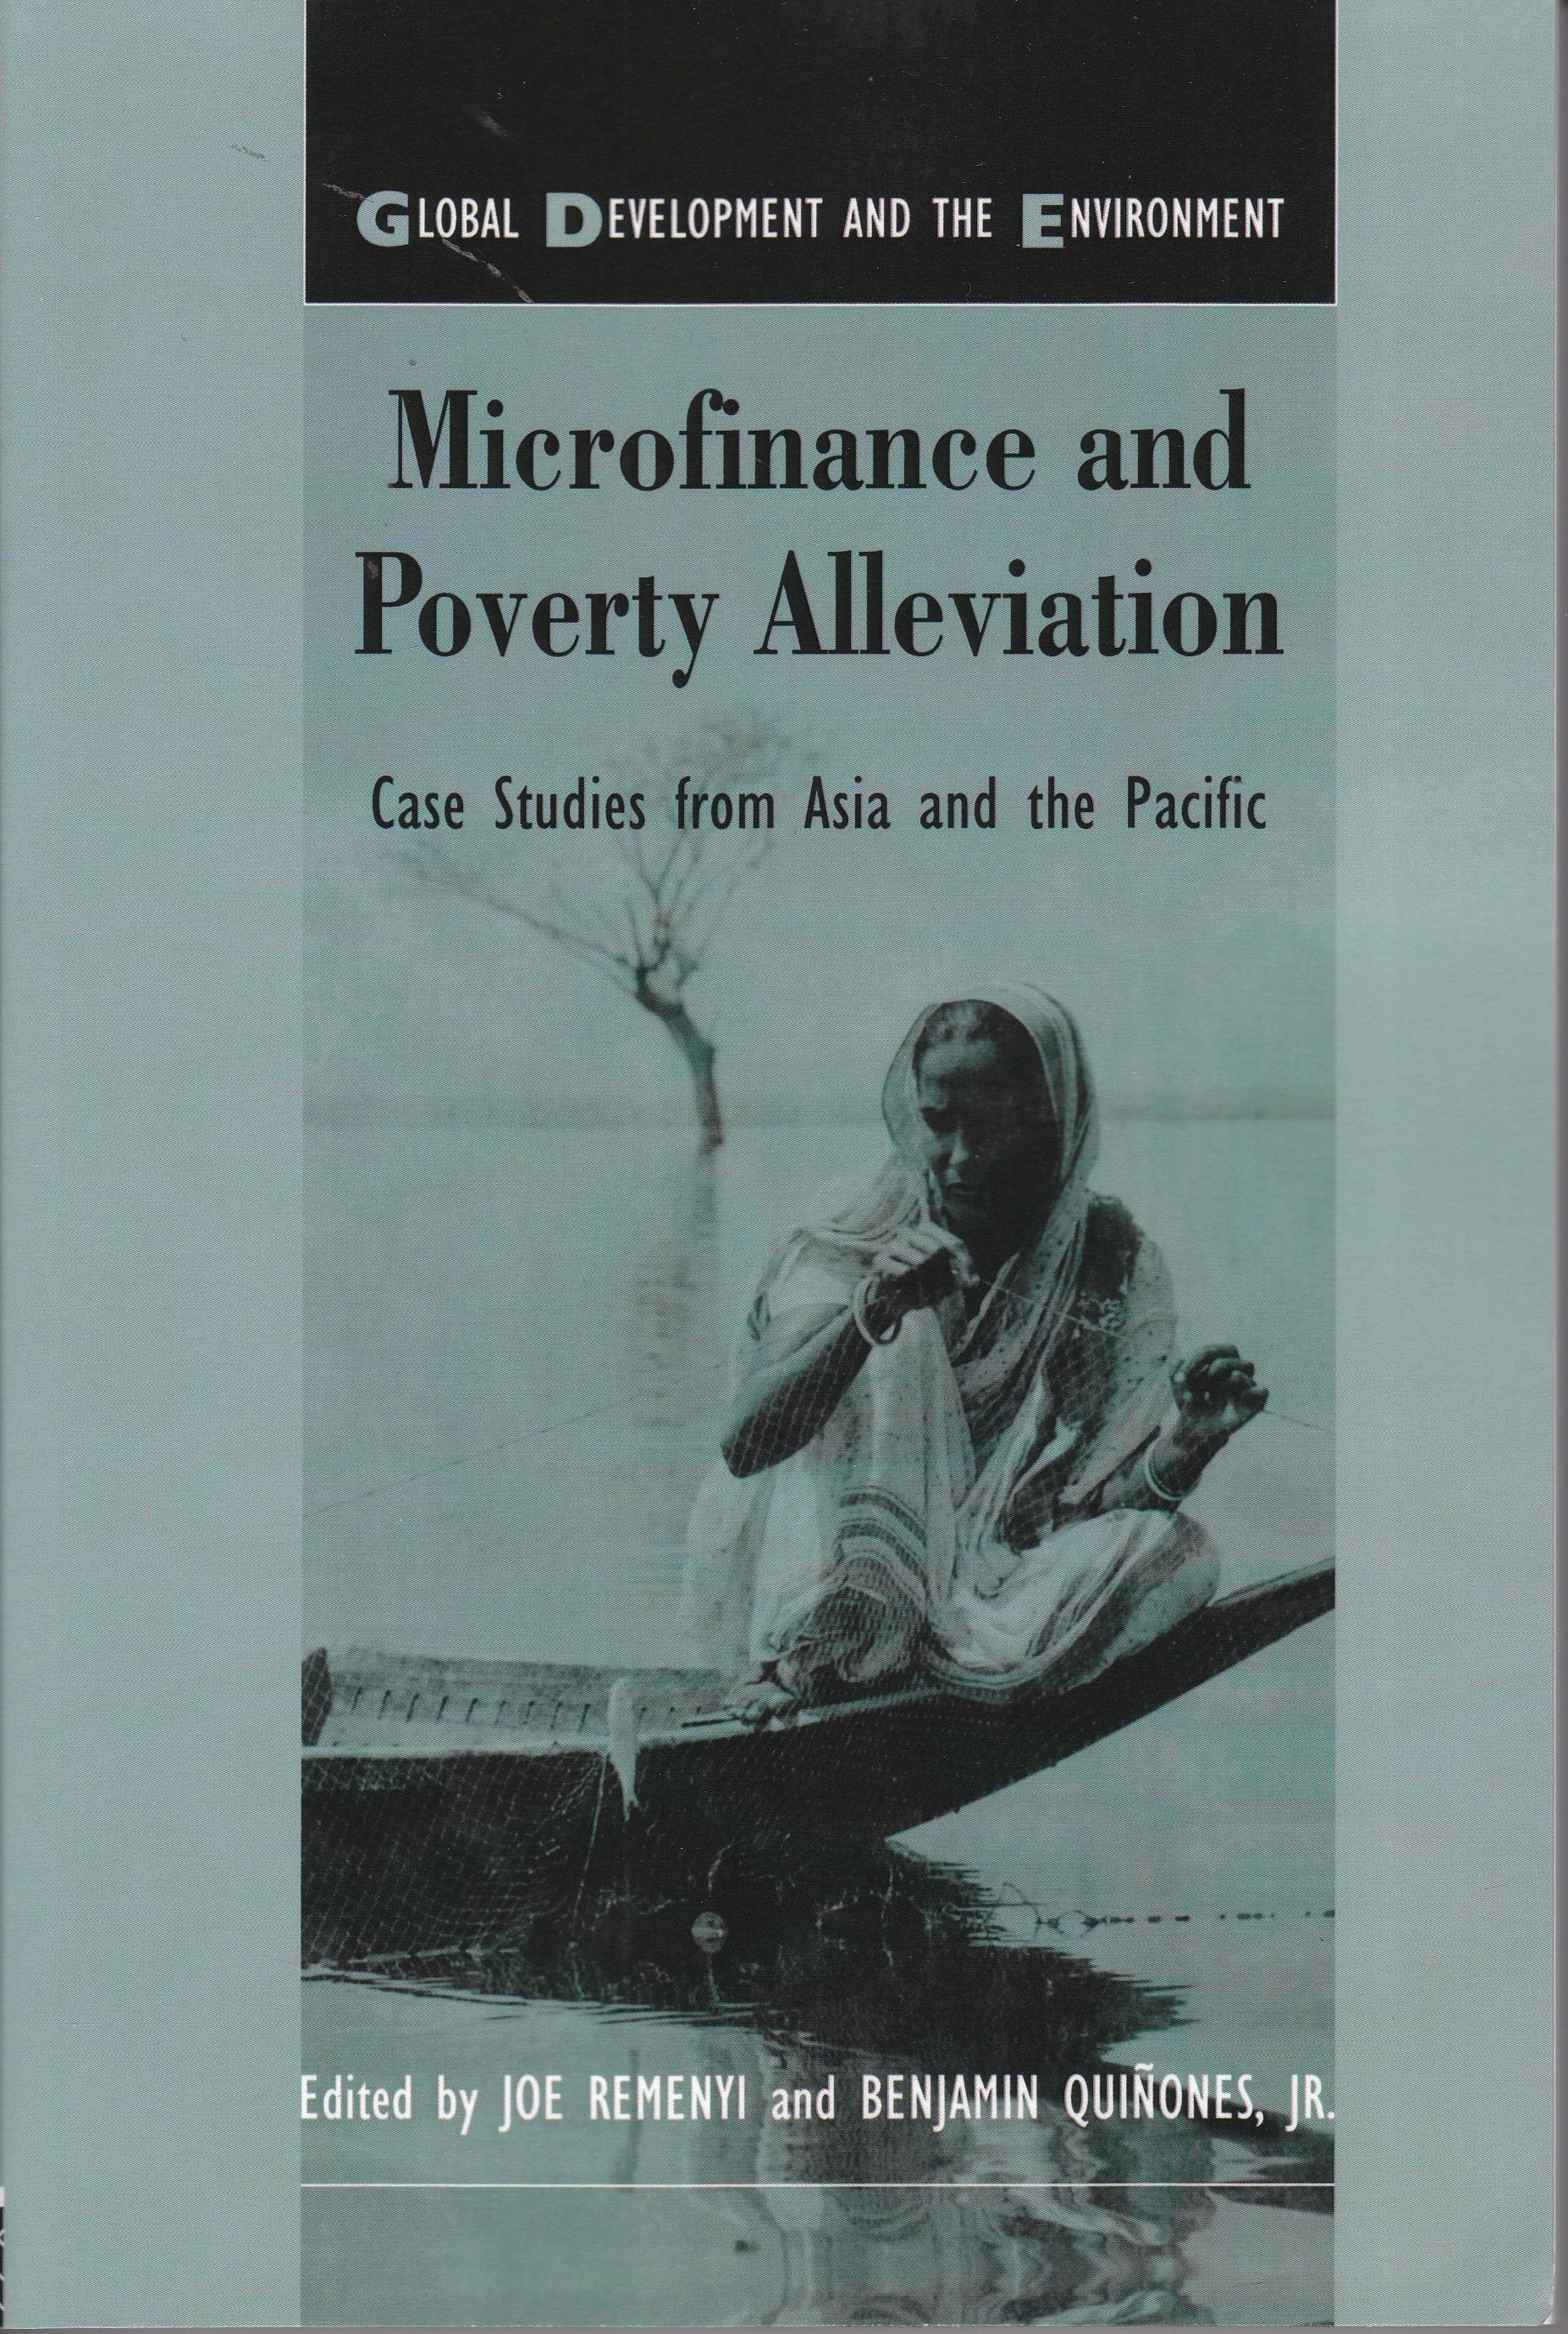 Microfinance and Poverty Alleviation "Case Studies from Asia and the Pacific"